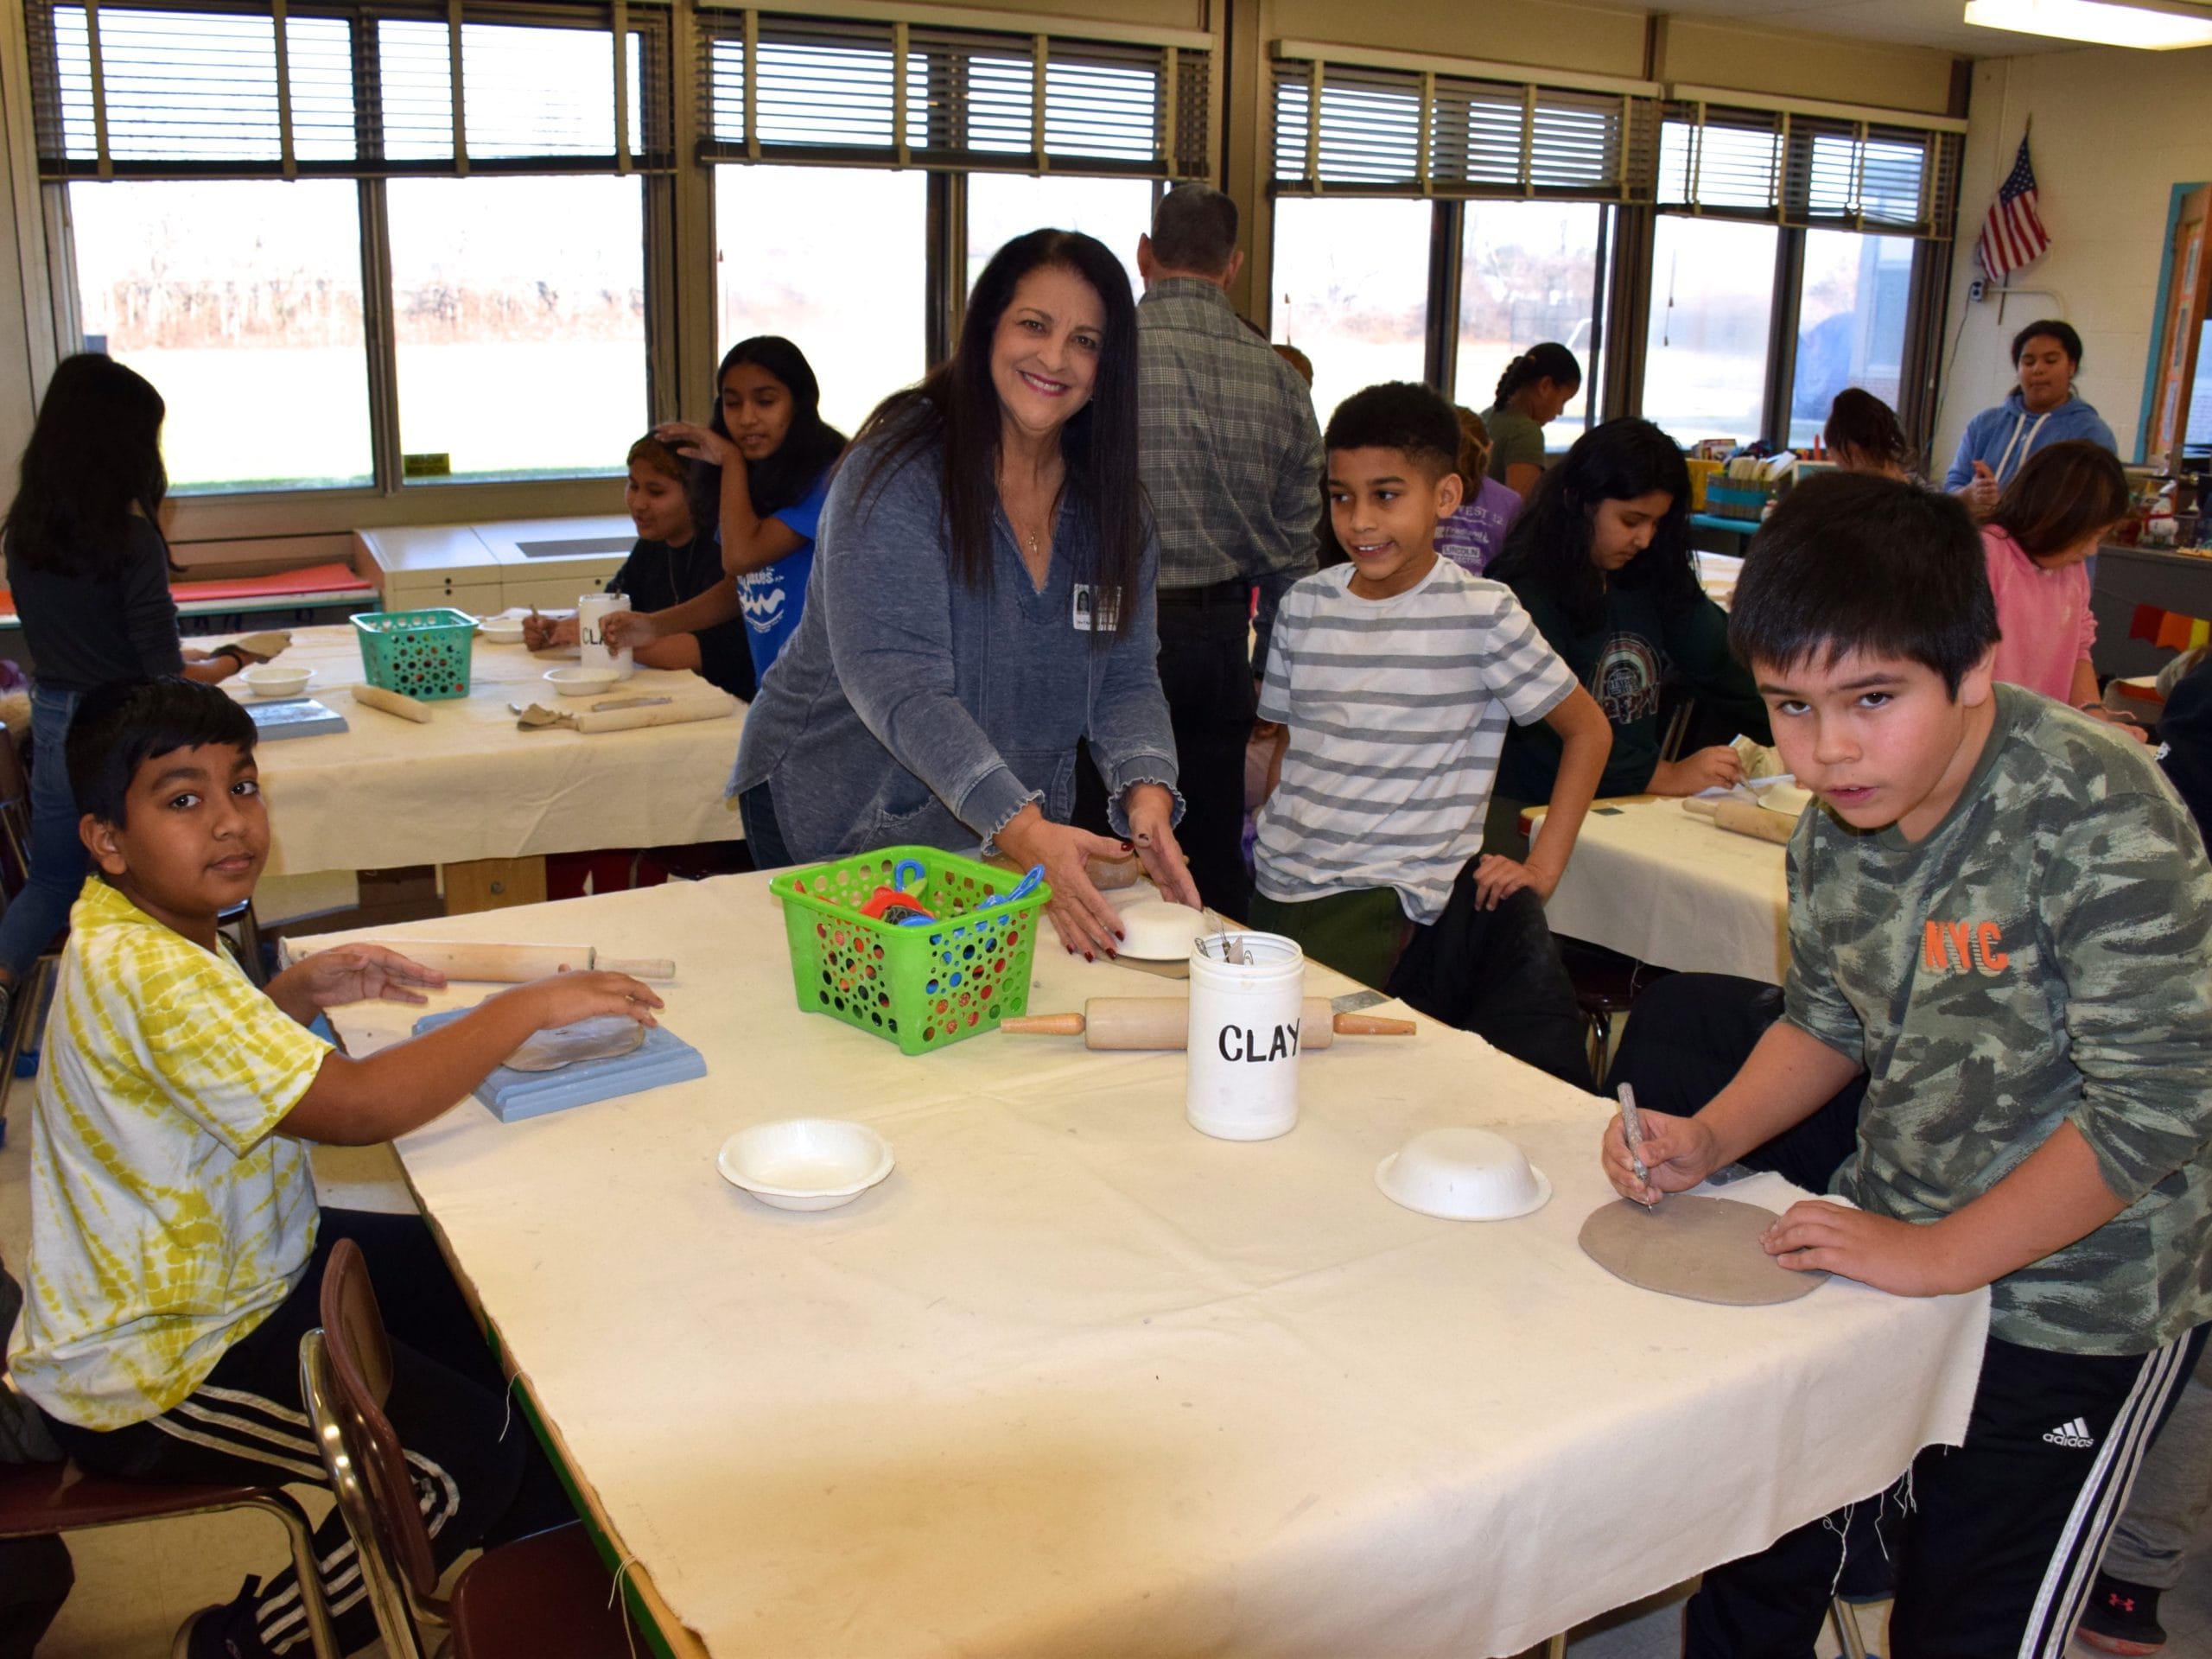 Deer Park Fifth Graders Get Creative During A Day In Clay